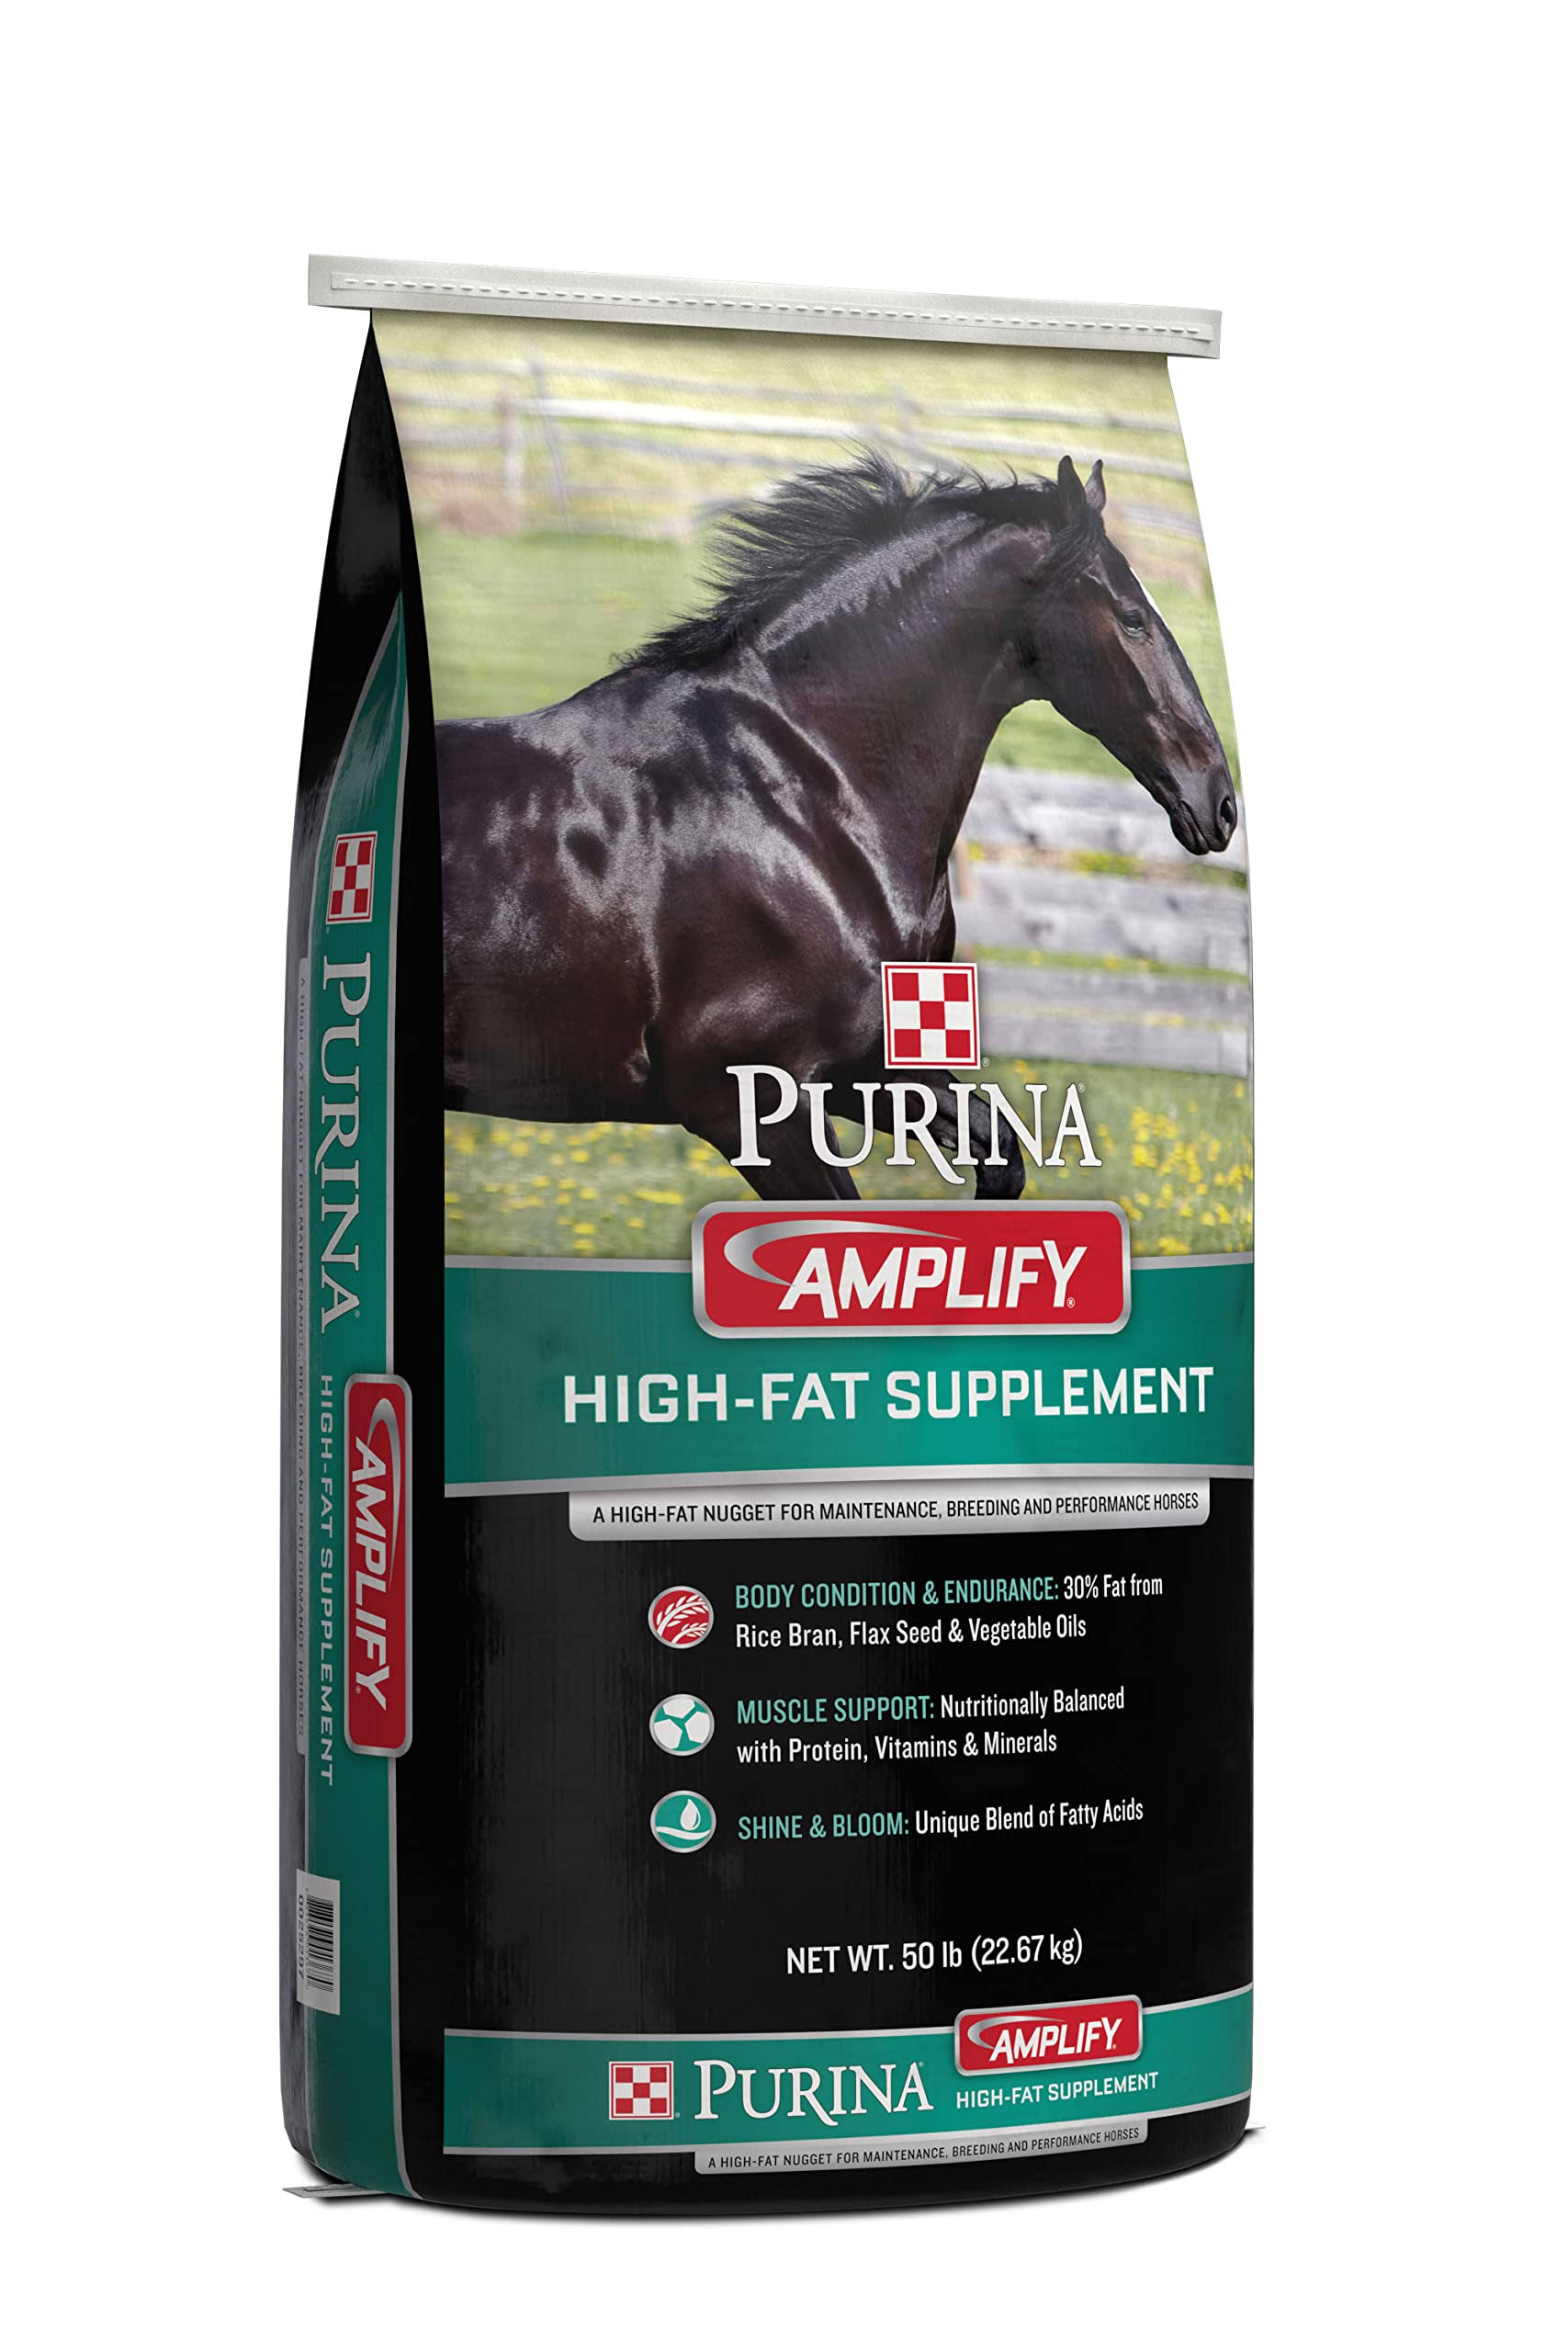 Purina Animal Nutrition Amplify Equine Supplement | Dogs